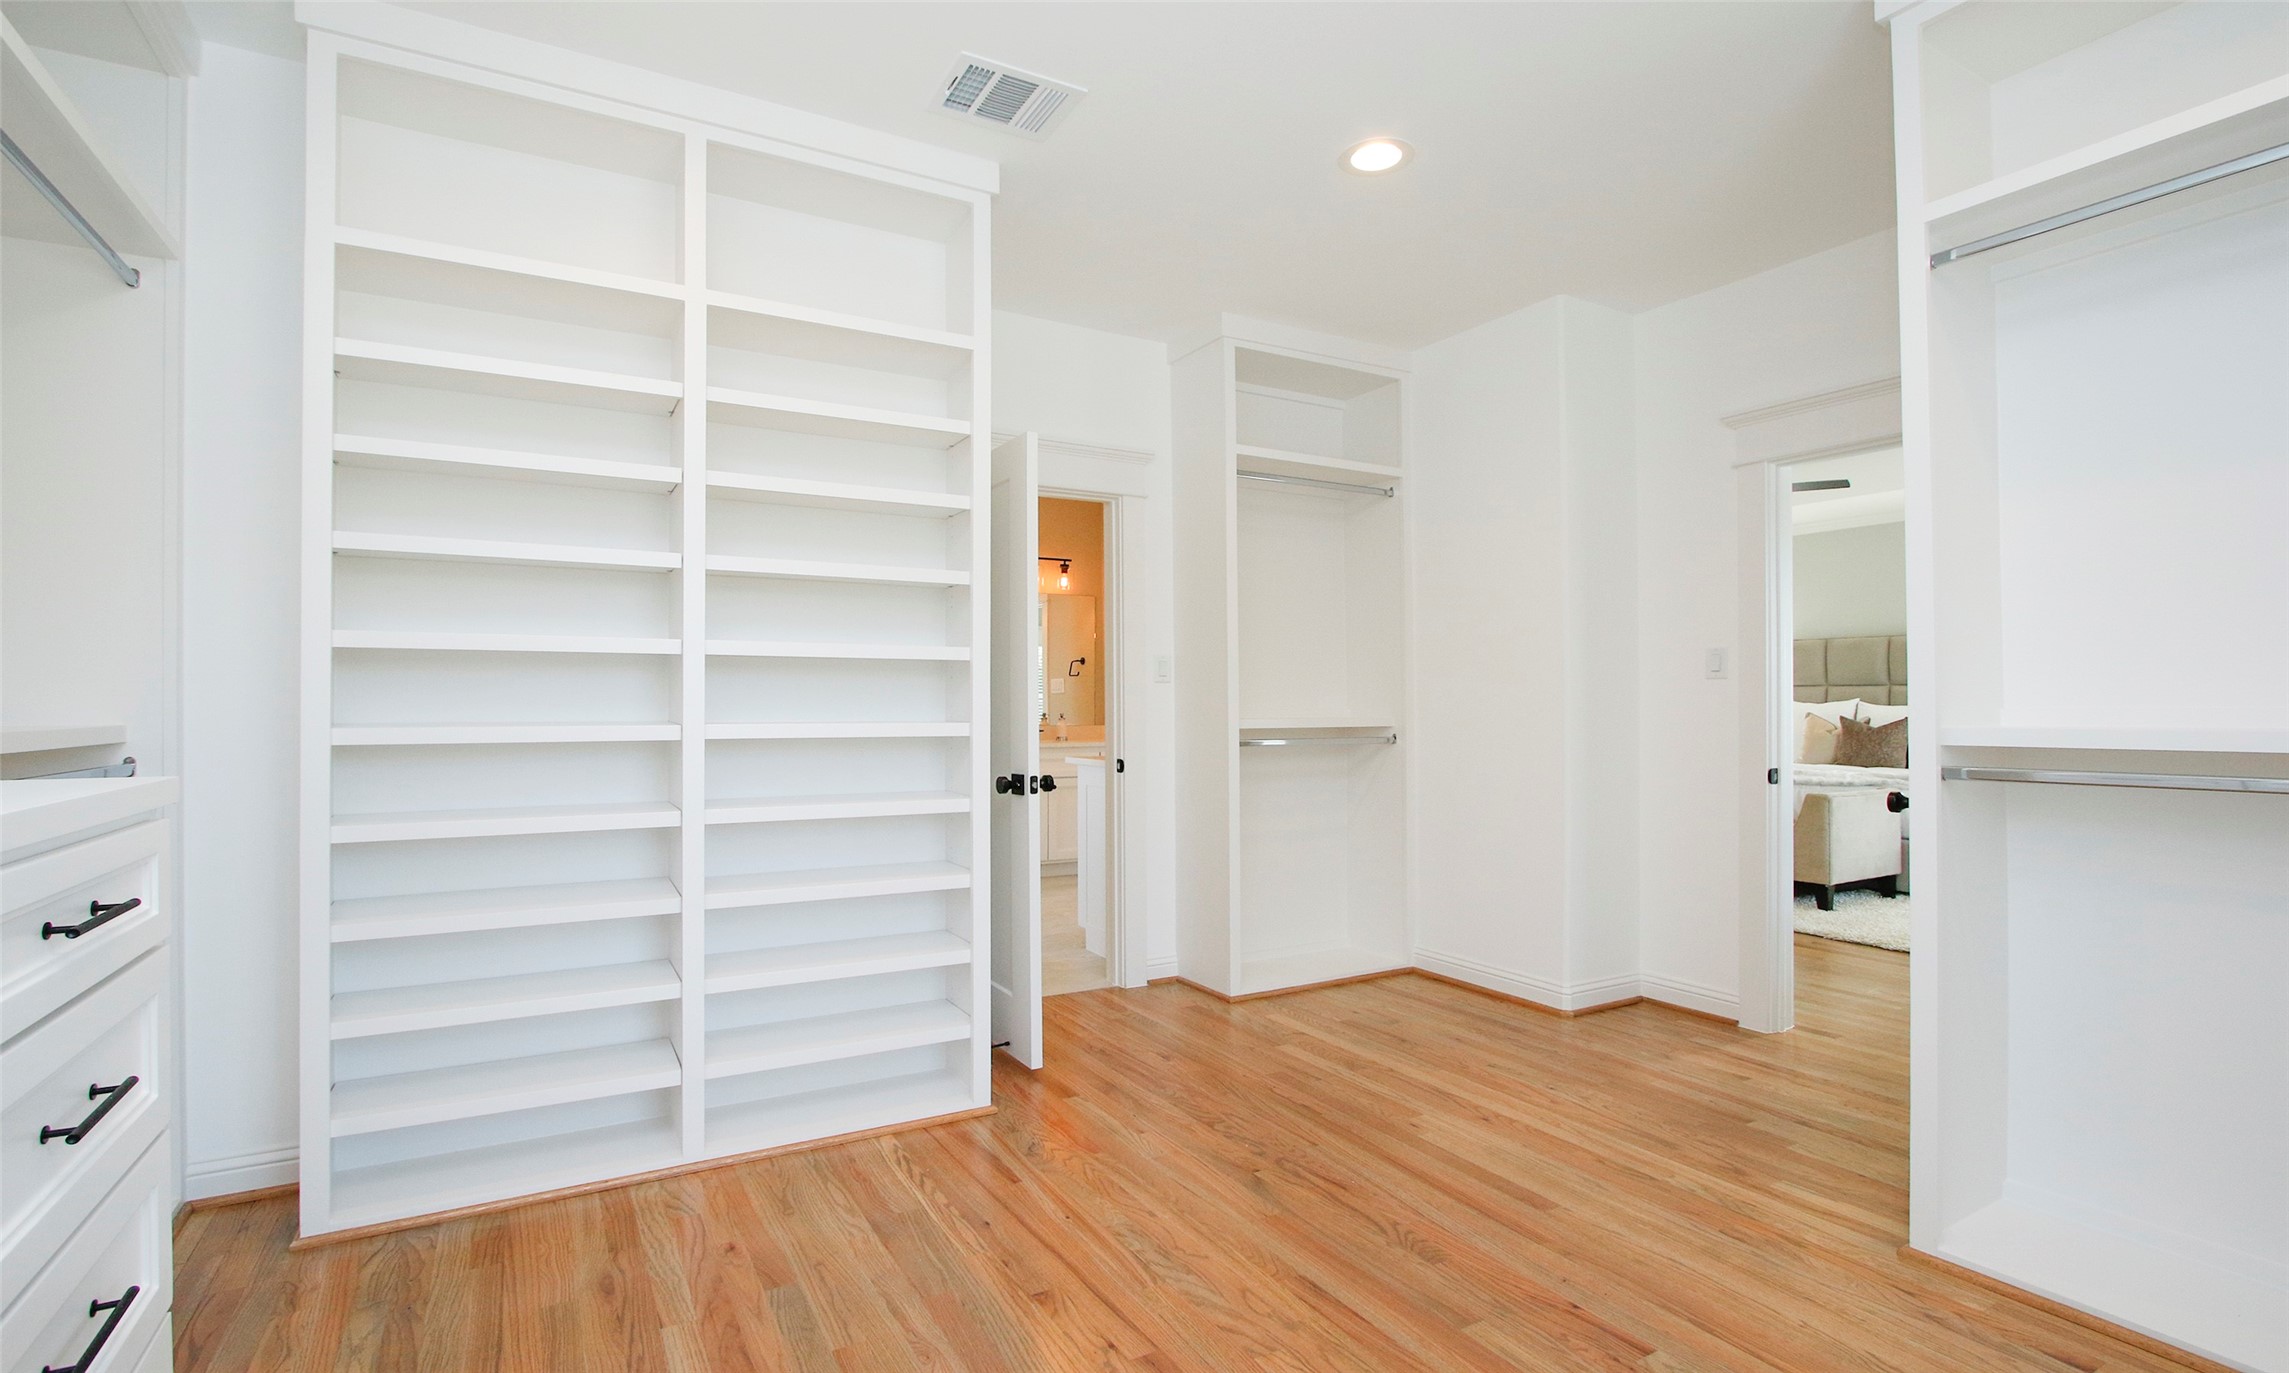 Primary Closet---TONS OF STORAGE and natural light